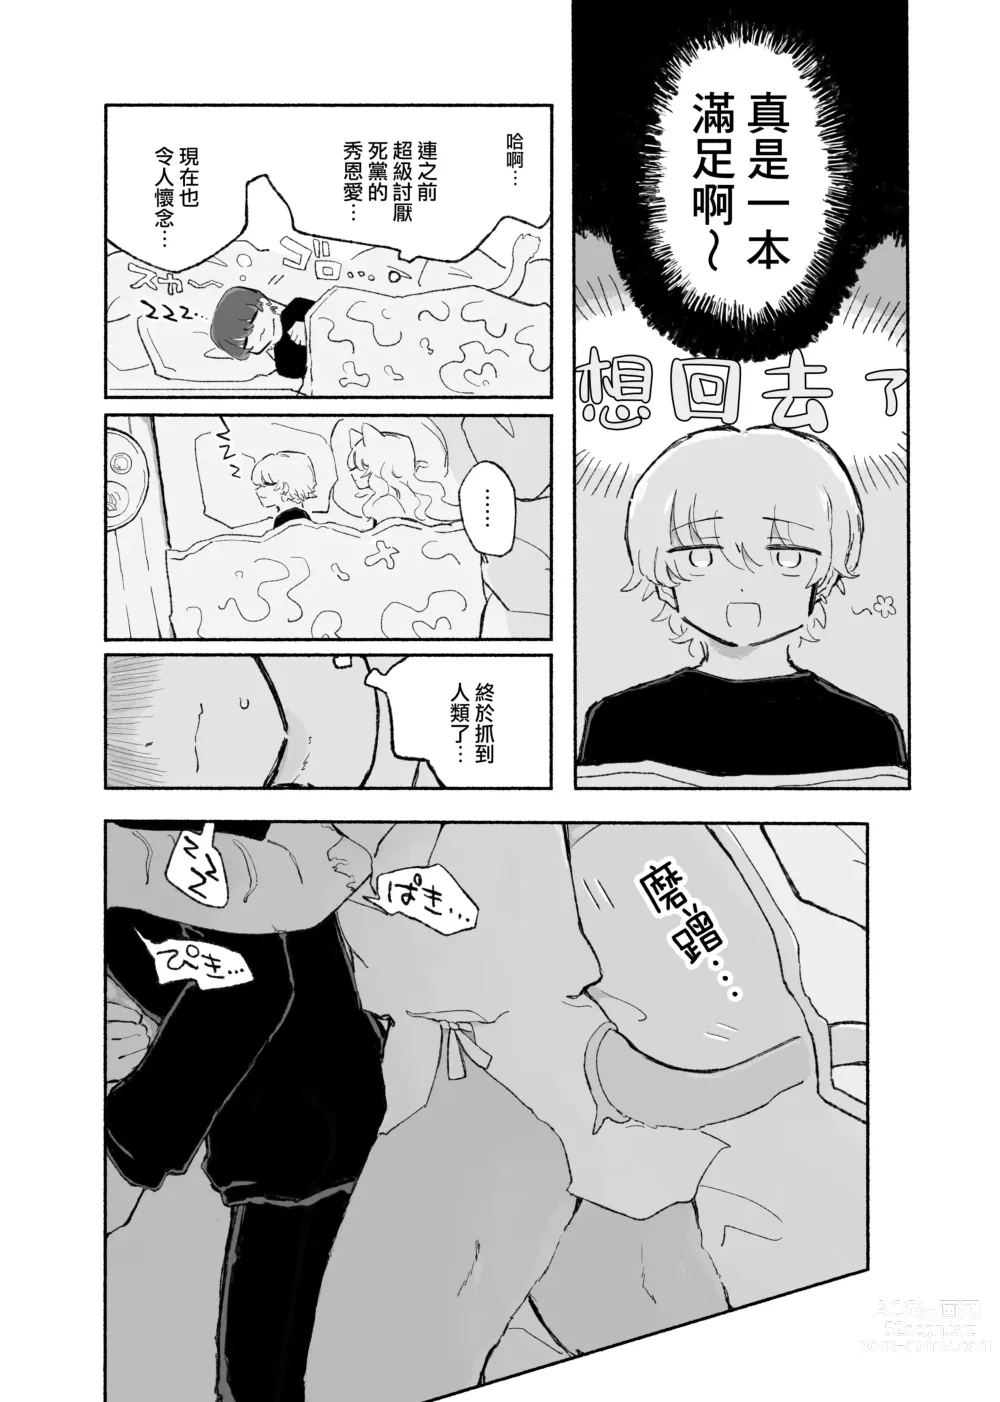 Page 26 of doujinshi 零之惡魔